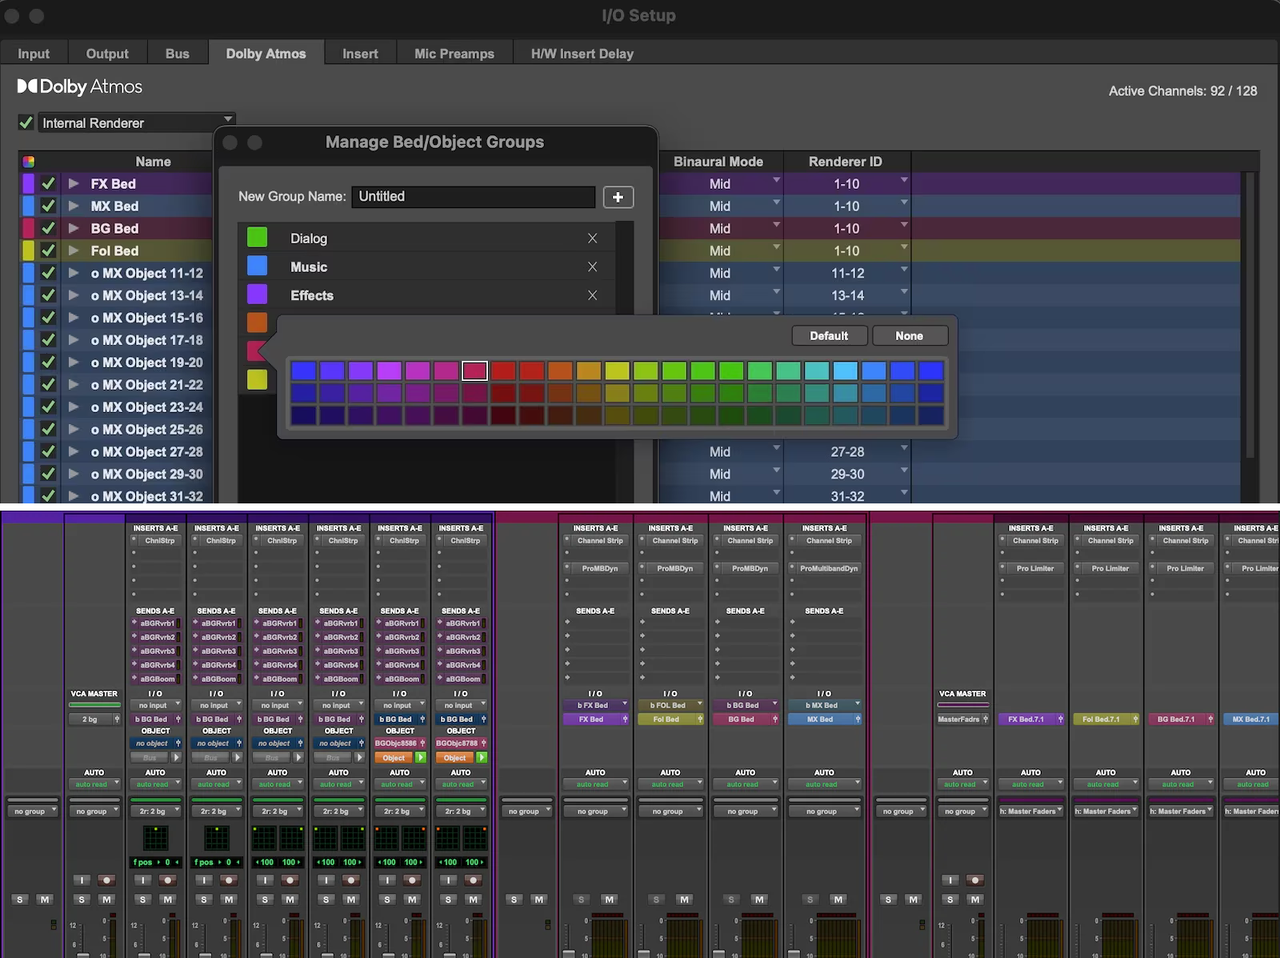 Pro Tools 2023.6 Software Update Now Available